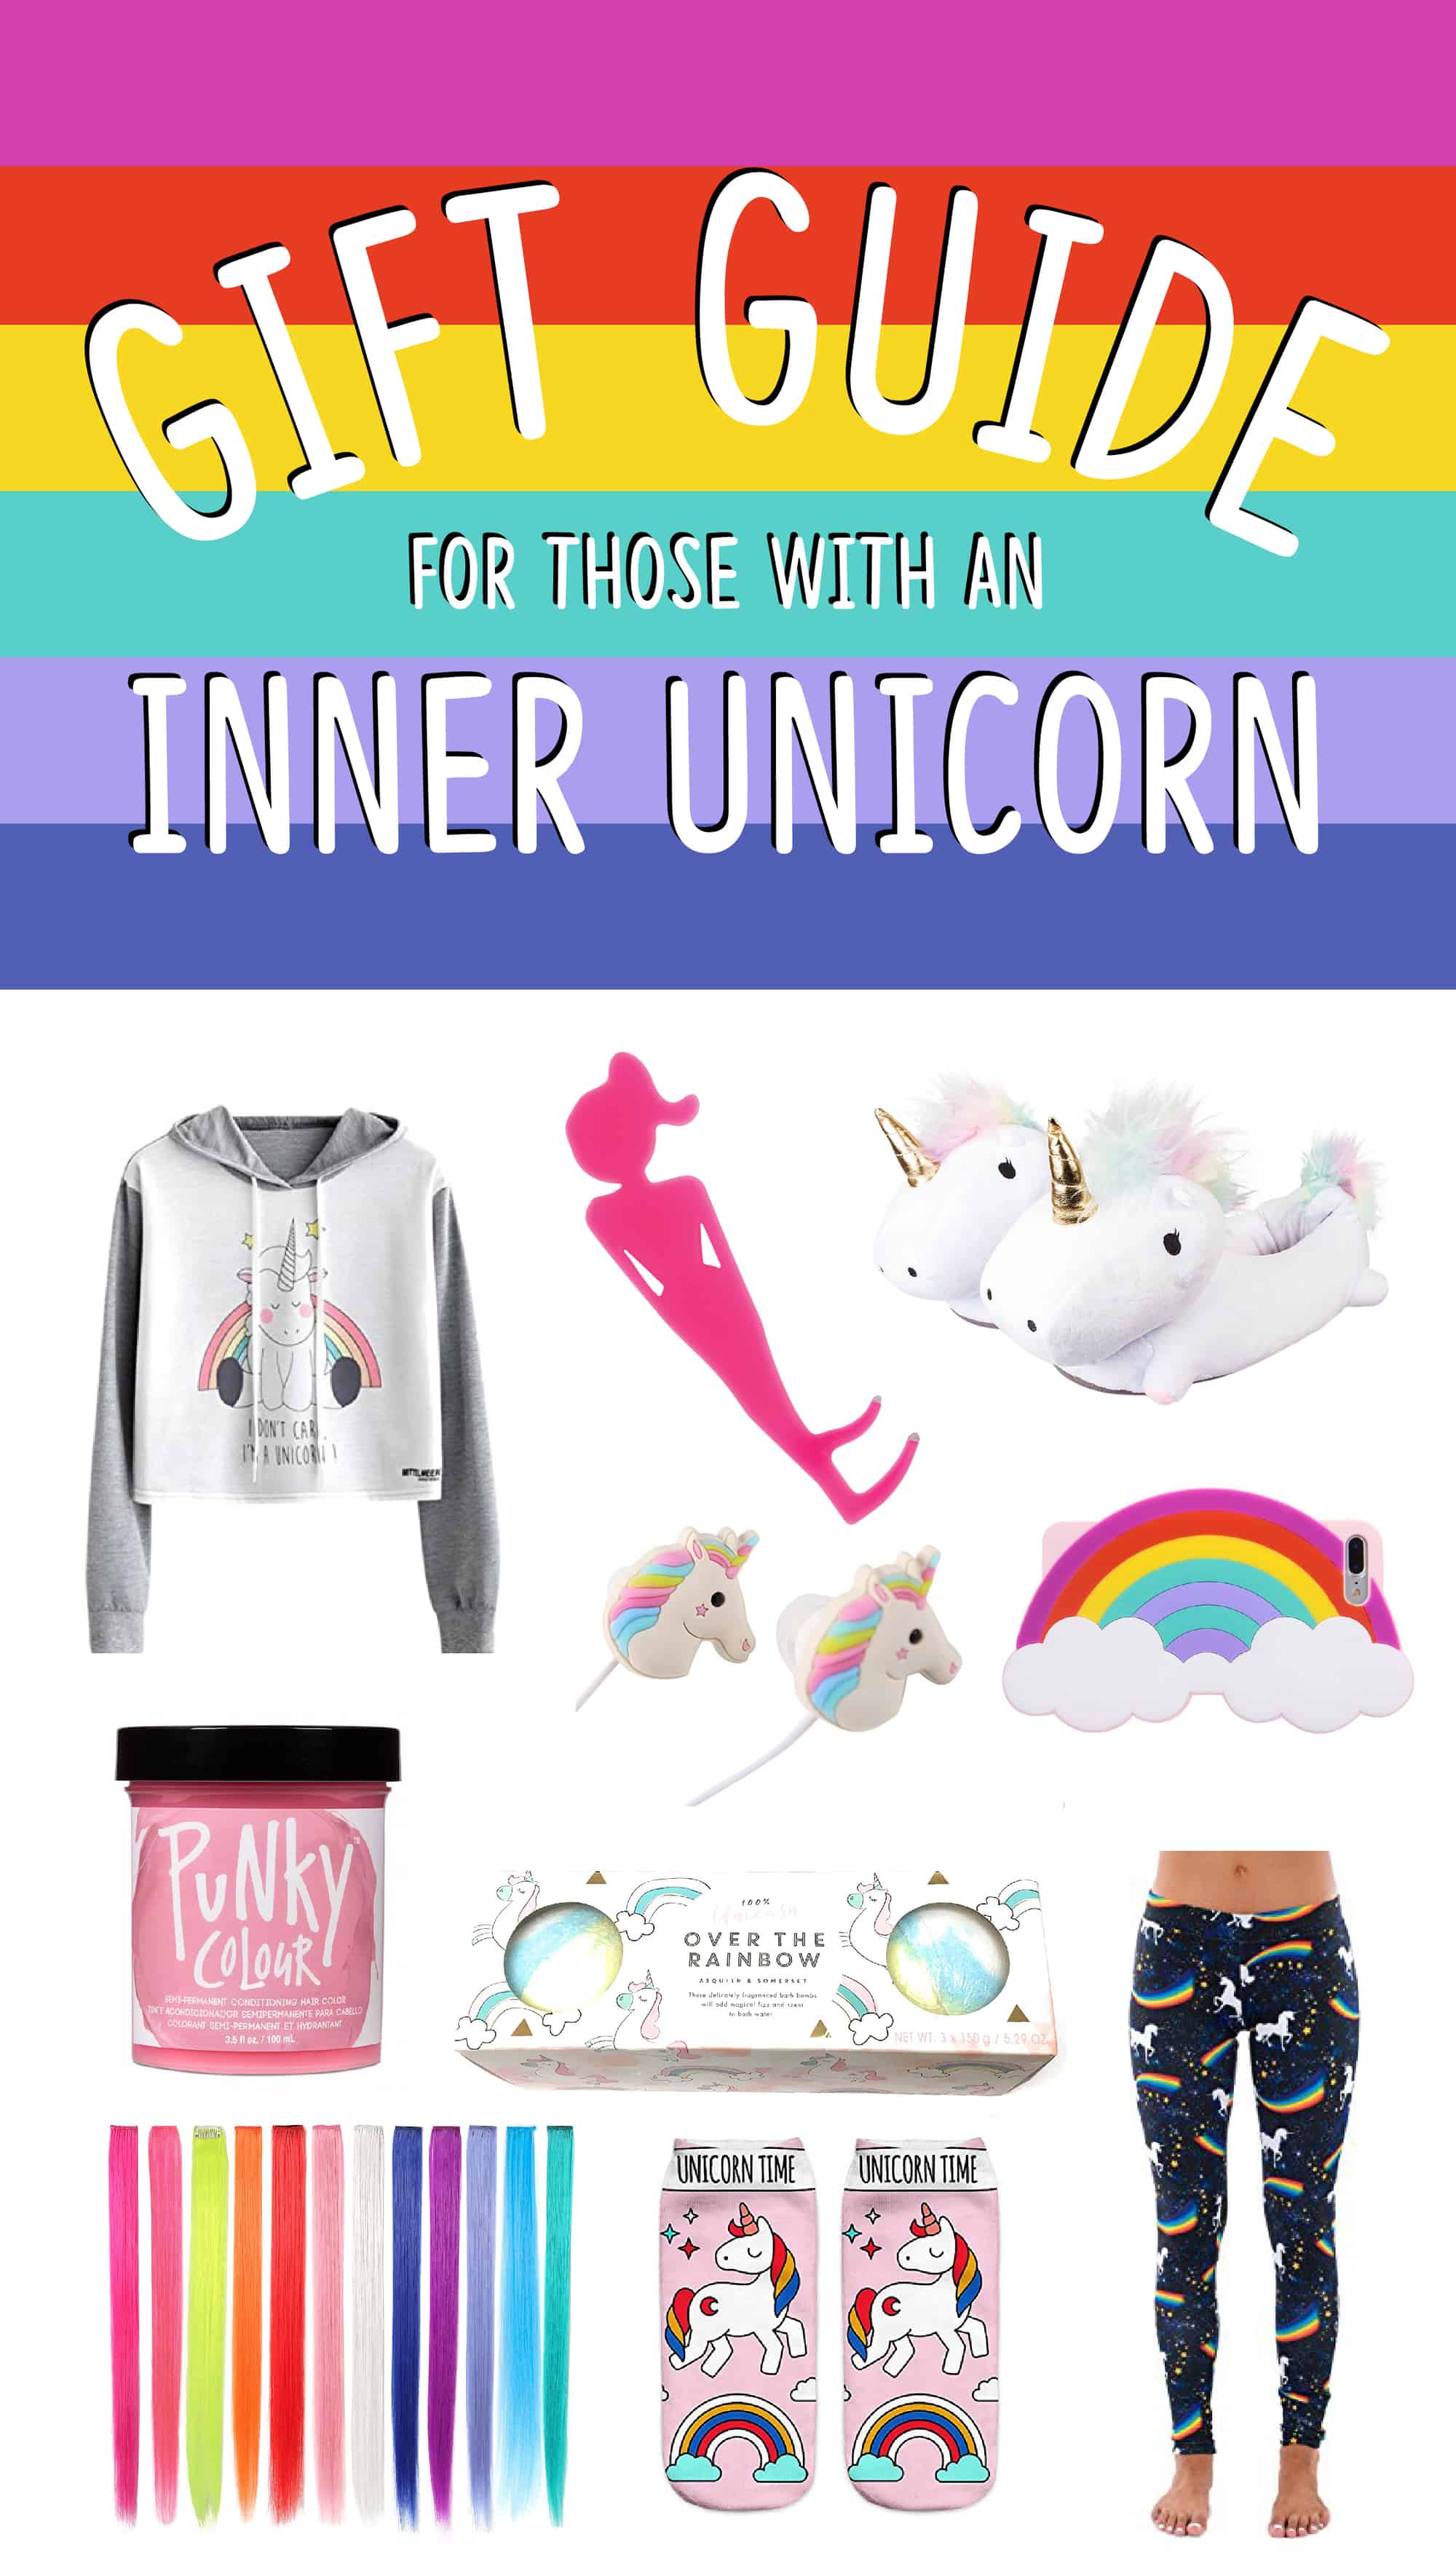 Graphic for "Gift Guide for those with an inner unicorn"